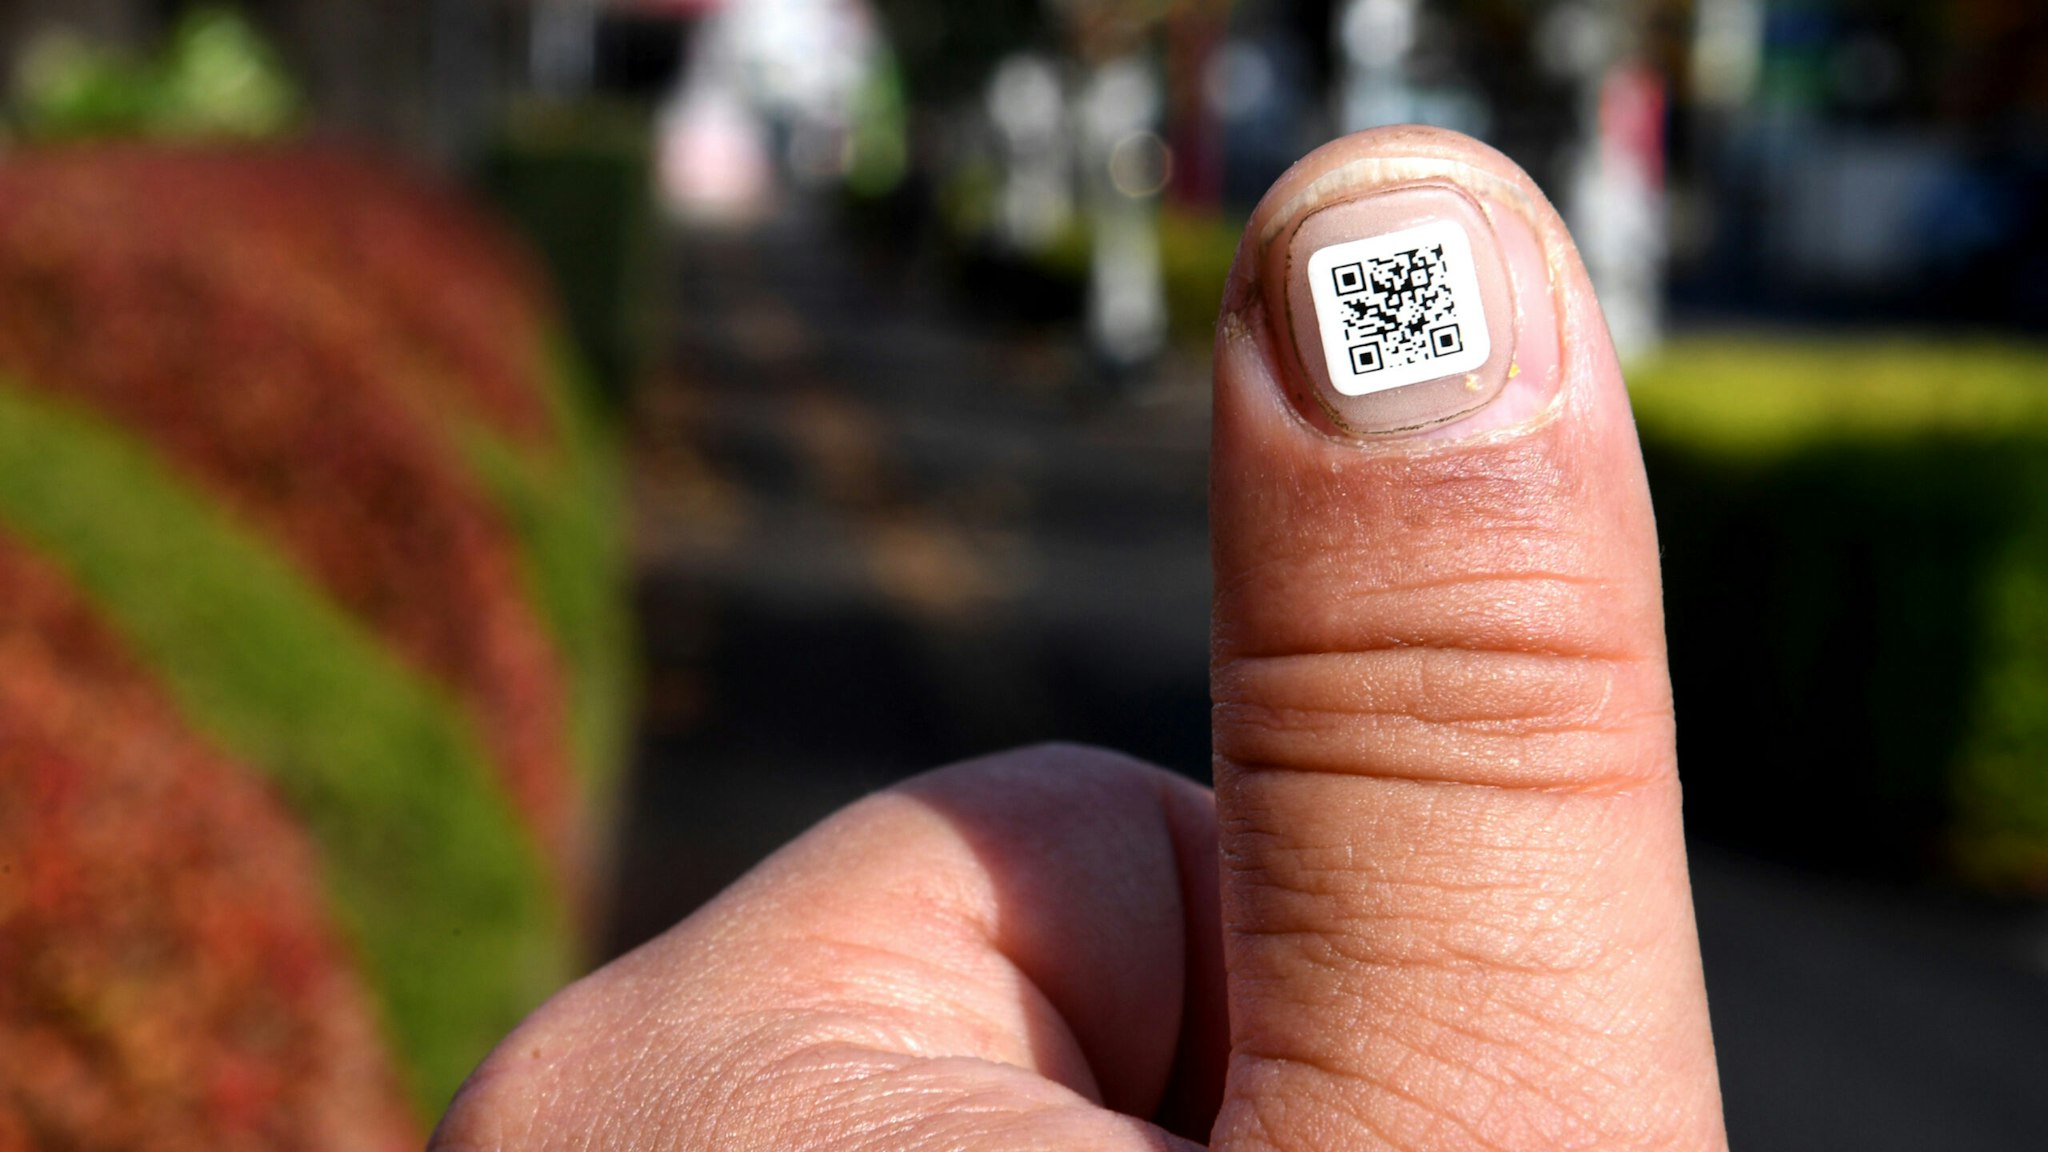 This picture taken on December 5, 2016 shows a city officer displaying a QR code on his fingernail near the Iruma city hall in Iruma, Saitama prefecture, a western suburb of Tokyo. A Japanese city has introduced a novel way to keep track of senior citizens with dementia who are prone to getting lost -- tagging their fingers and toes with scan-able barcodes. A company in Iruma, north of Tokyo, developed tiny nail stickers, each of which carries a unique identity number to help concerned families find missing loved ones, according to the city's social welfare office